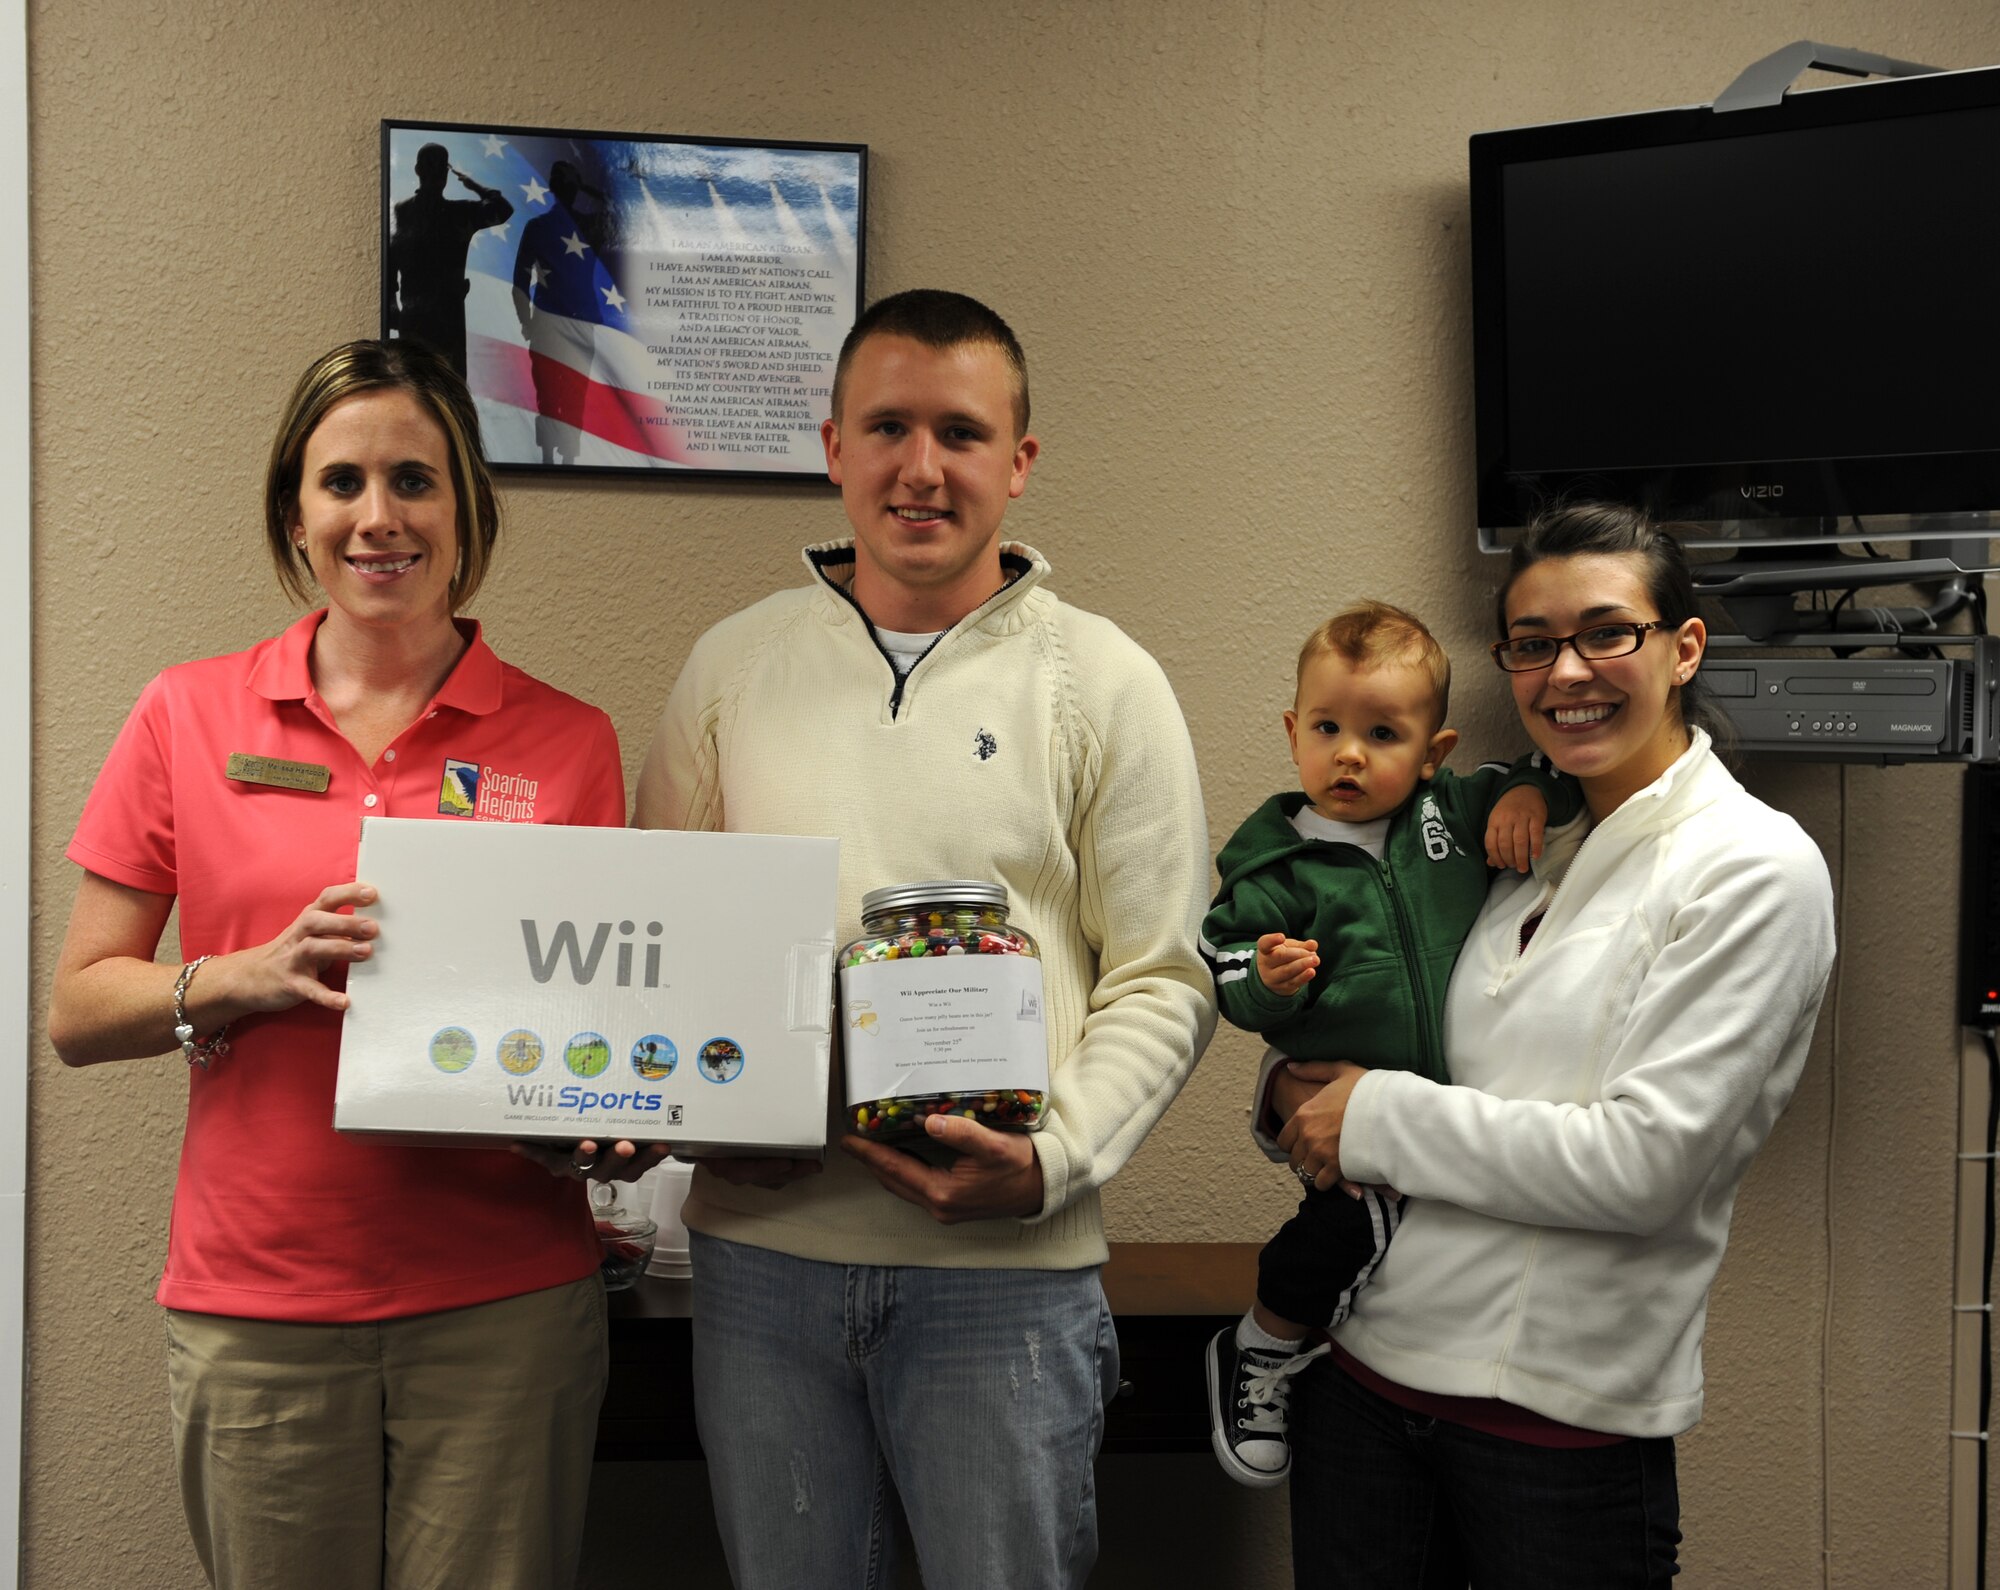 Airman 1st Class Colby Blocker, his wife, Joanna, and son, Cohen, pose for a photograph with Soaring Heights Communities assistant manager, Melissa Hancock, after being given a video game console in celebration of Military Family Appreciation month at Holloman Air Force Base, N.M., Nov. 25. The family won the gift after guessing the closest number of jelly beans in a jar. (U.S. Air Force photo/Airman Sondra M. Escutia)